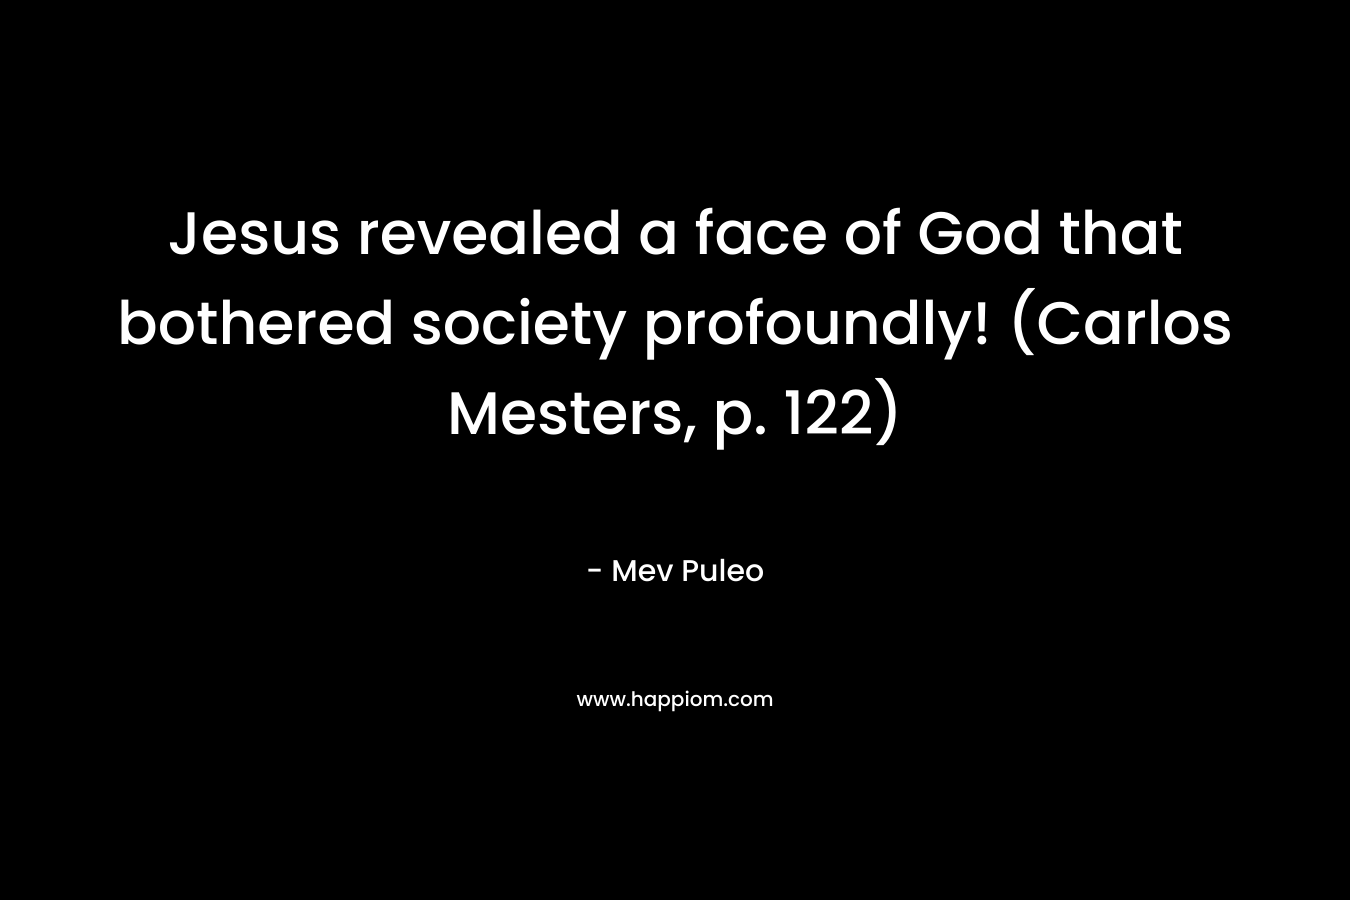 Jesus revealed a face of God that bothered society profoundly! (Carlos Mesters, p. 122) – Mev Puleo